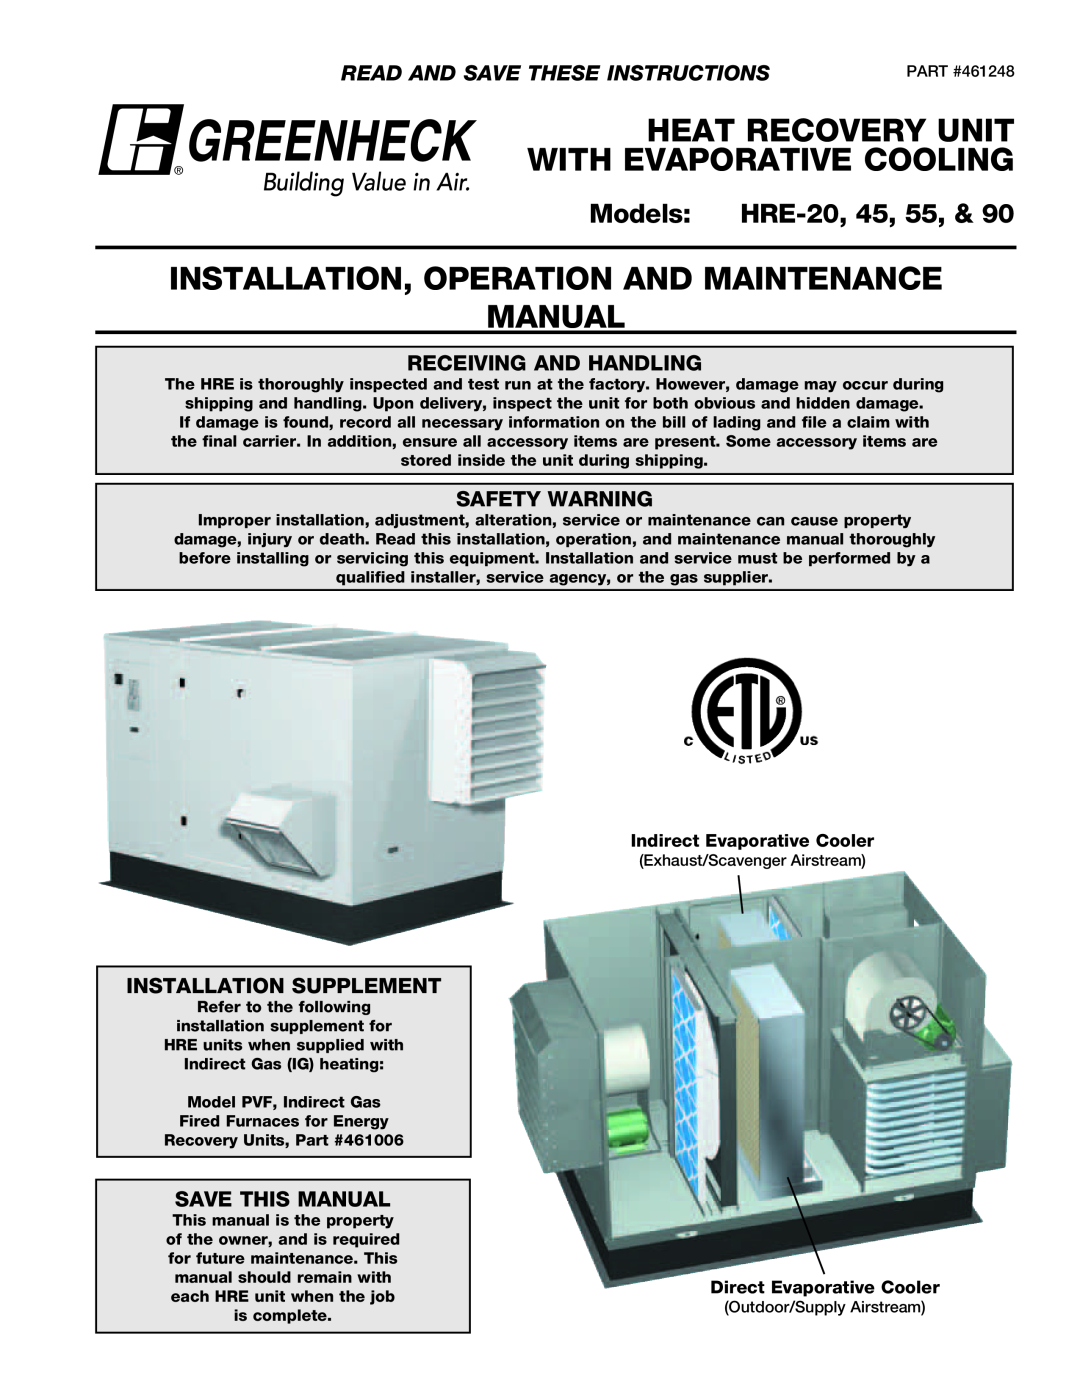 Greenheck Fan 90, 55 manual Heat Recovery Unit, With Evaporative Cooling, Installation, Operation and Maintenance Manual 